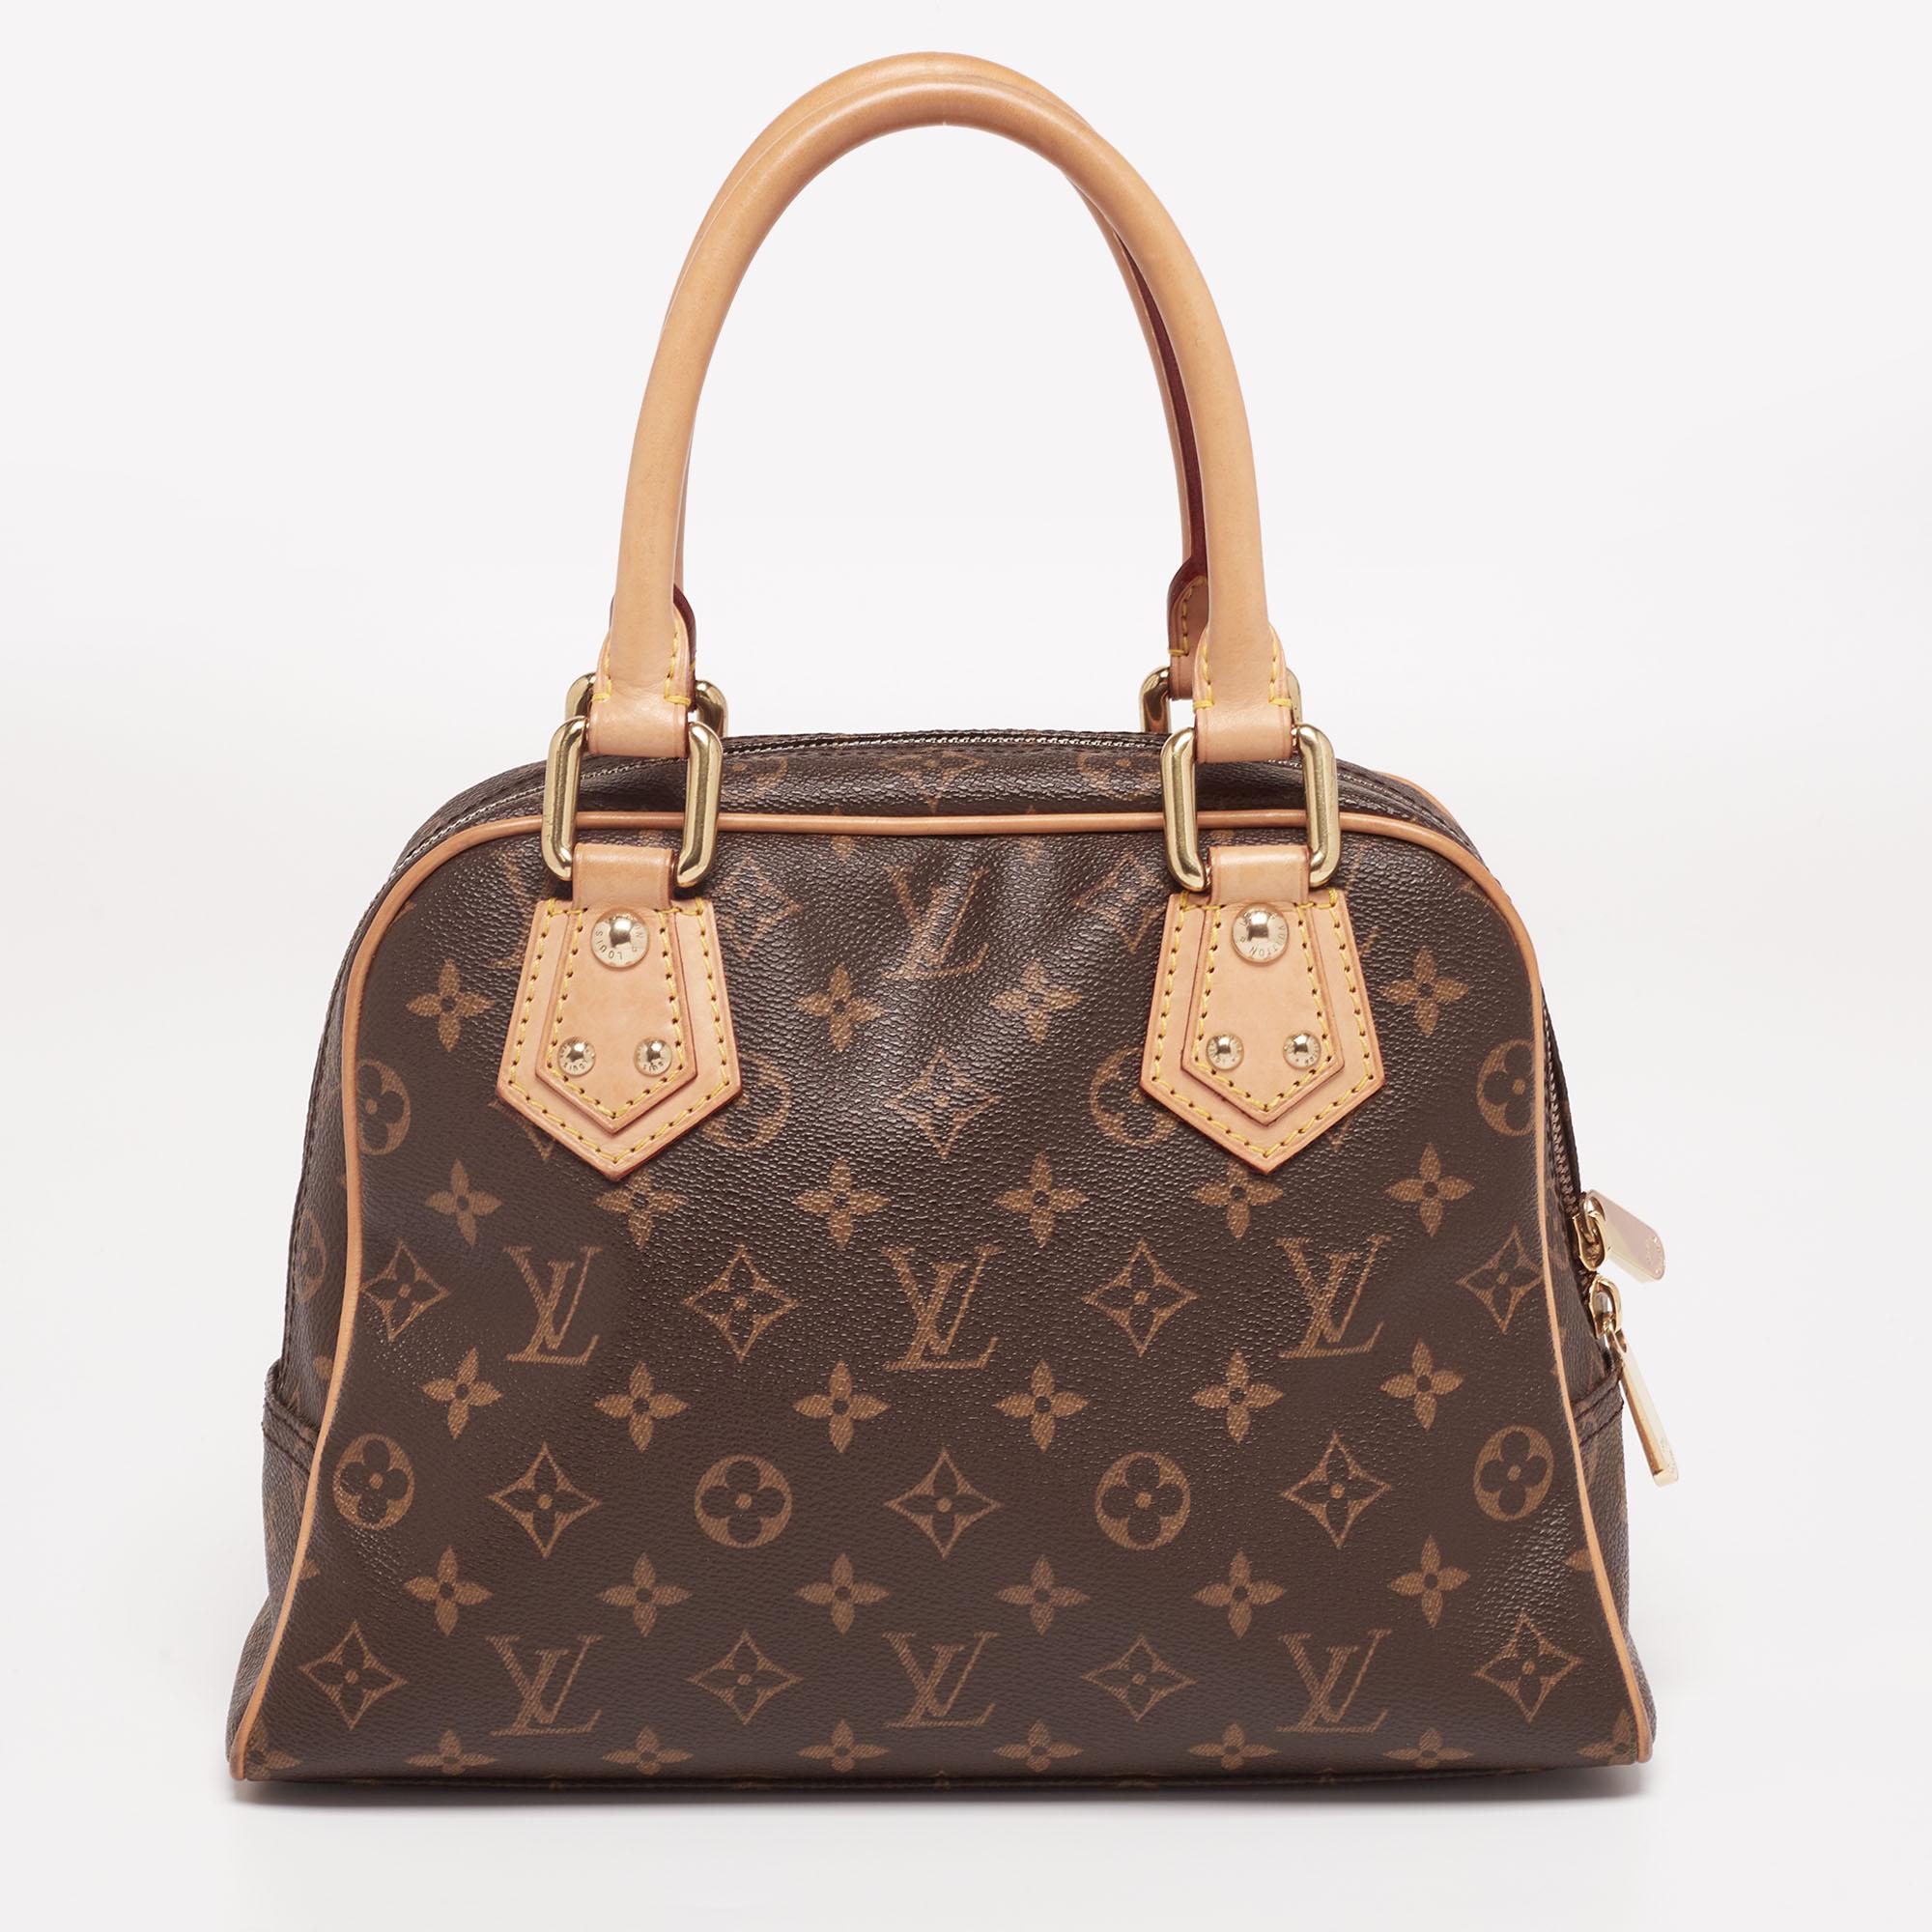 Own this gorgeous Manhattan PM Bag by Louis Vuitton today and flaunt it wherever you go. The bag has been crafted from signature Monogram canvas and lined with Alcantara on the insides. It is equipped with two push-lock pockets on the front, a main